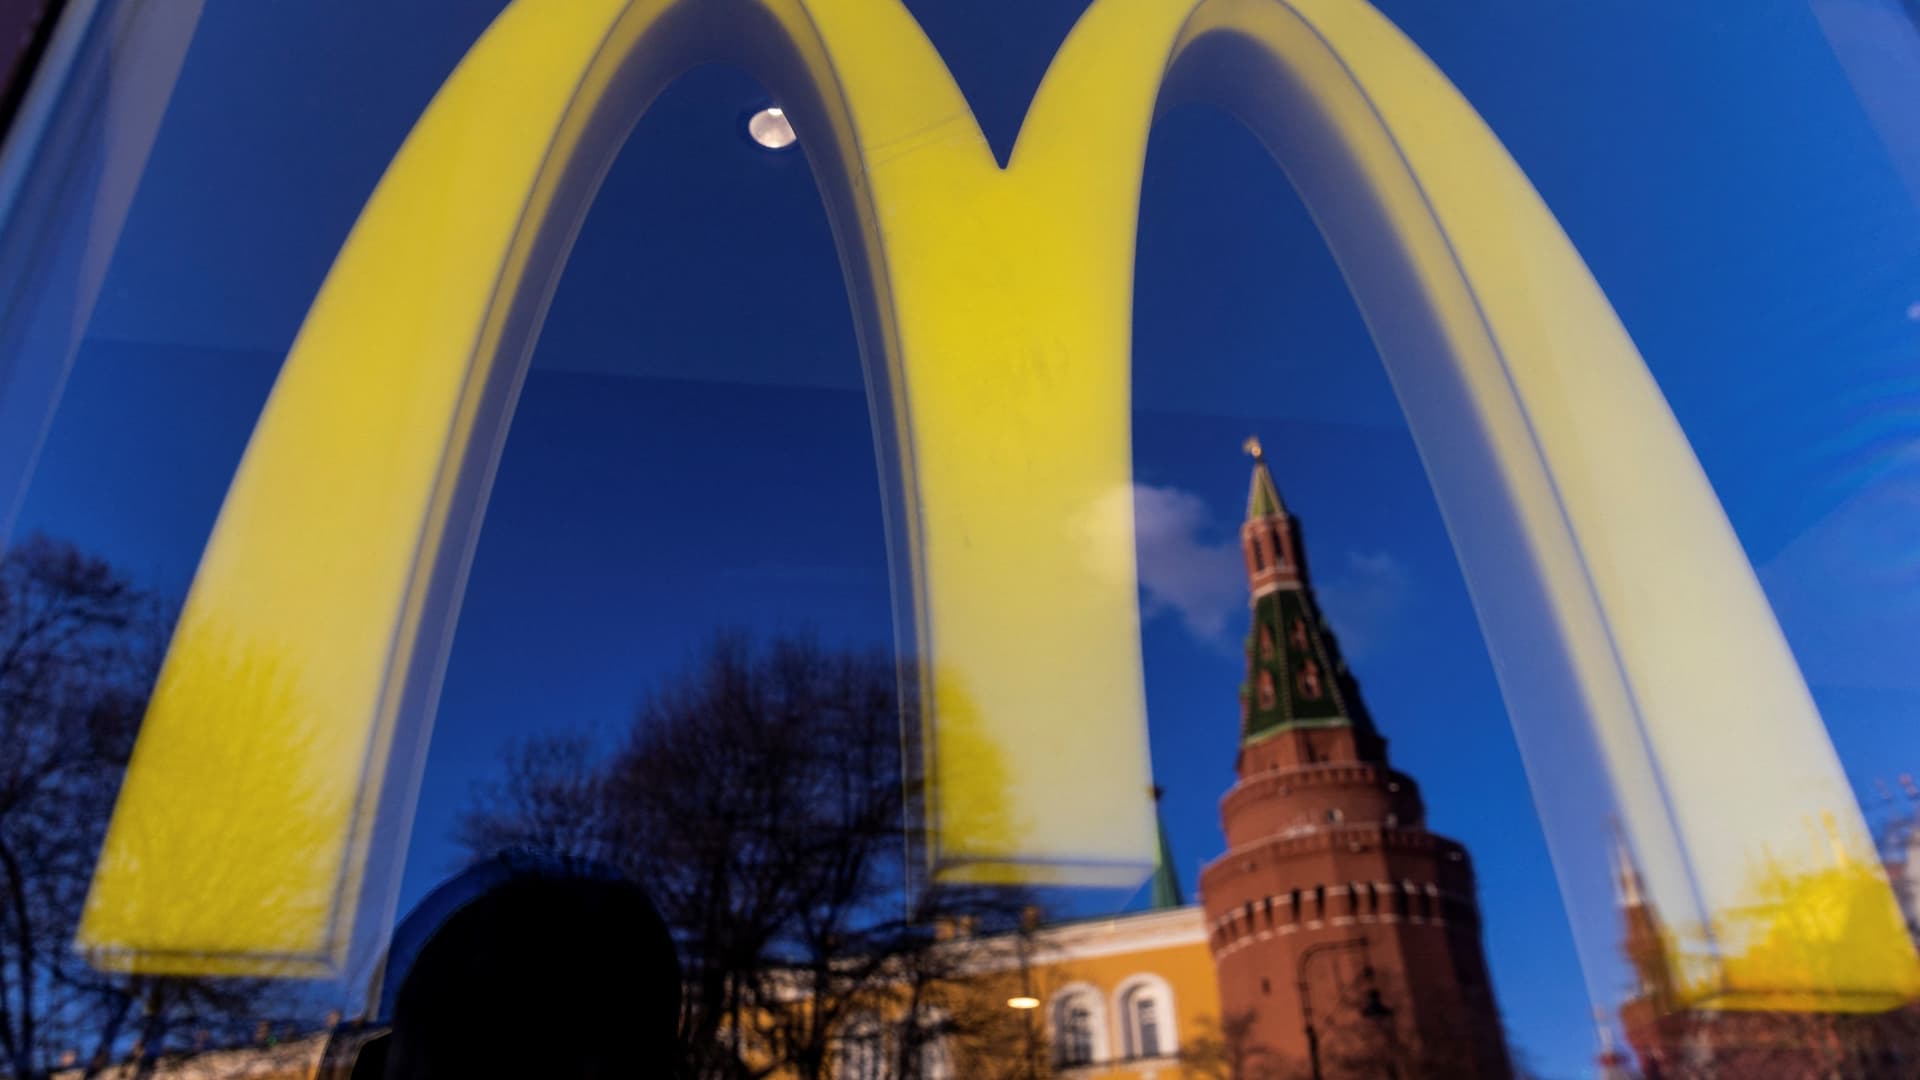 A logo of the McDonald's restaurant is seen in the window with a reflection of Kremlin's tower in central Moscow, Russia March 9, 2022.